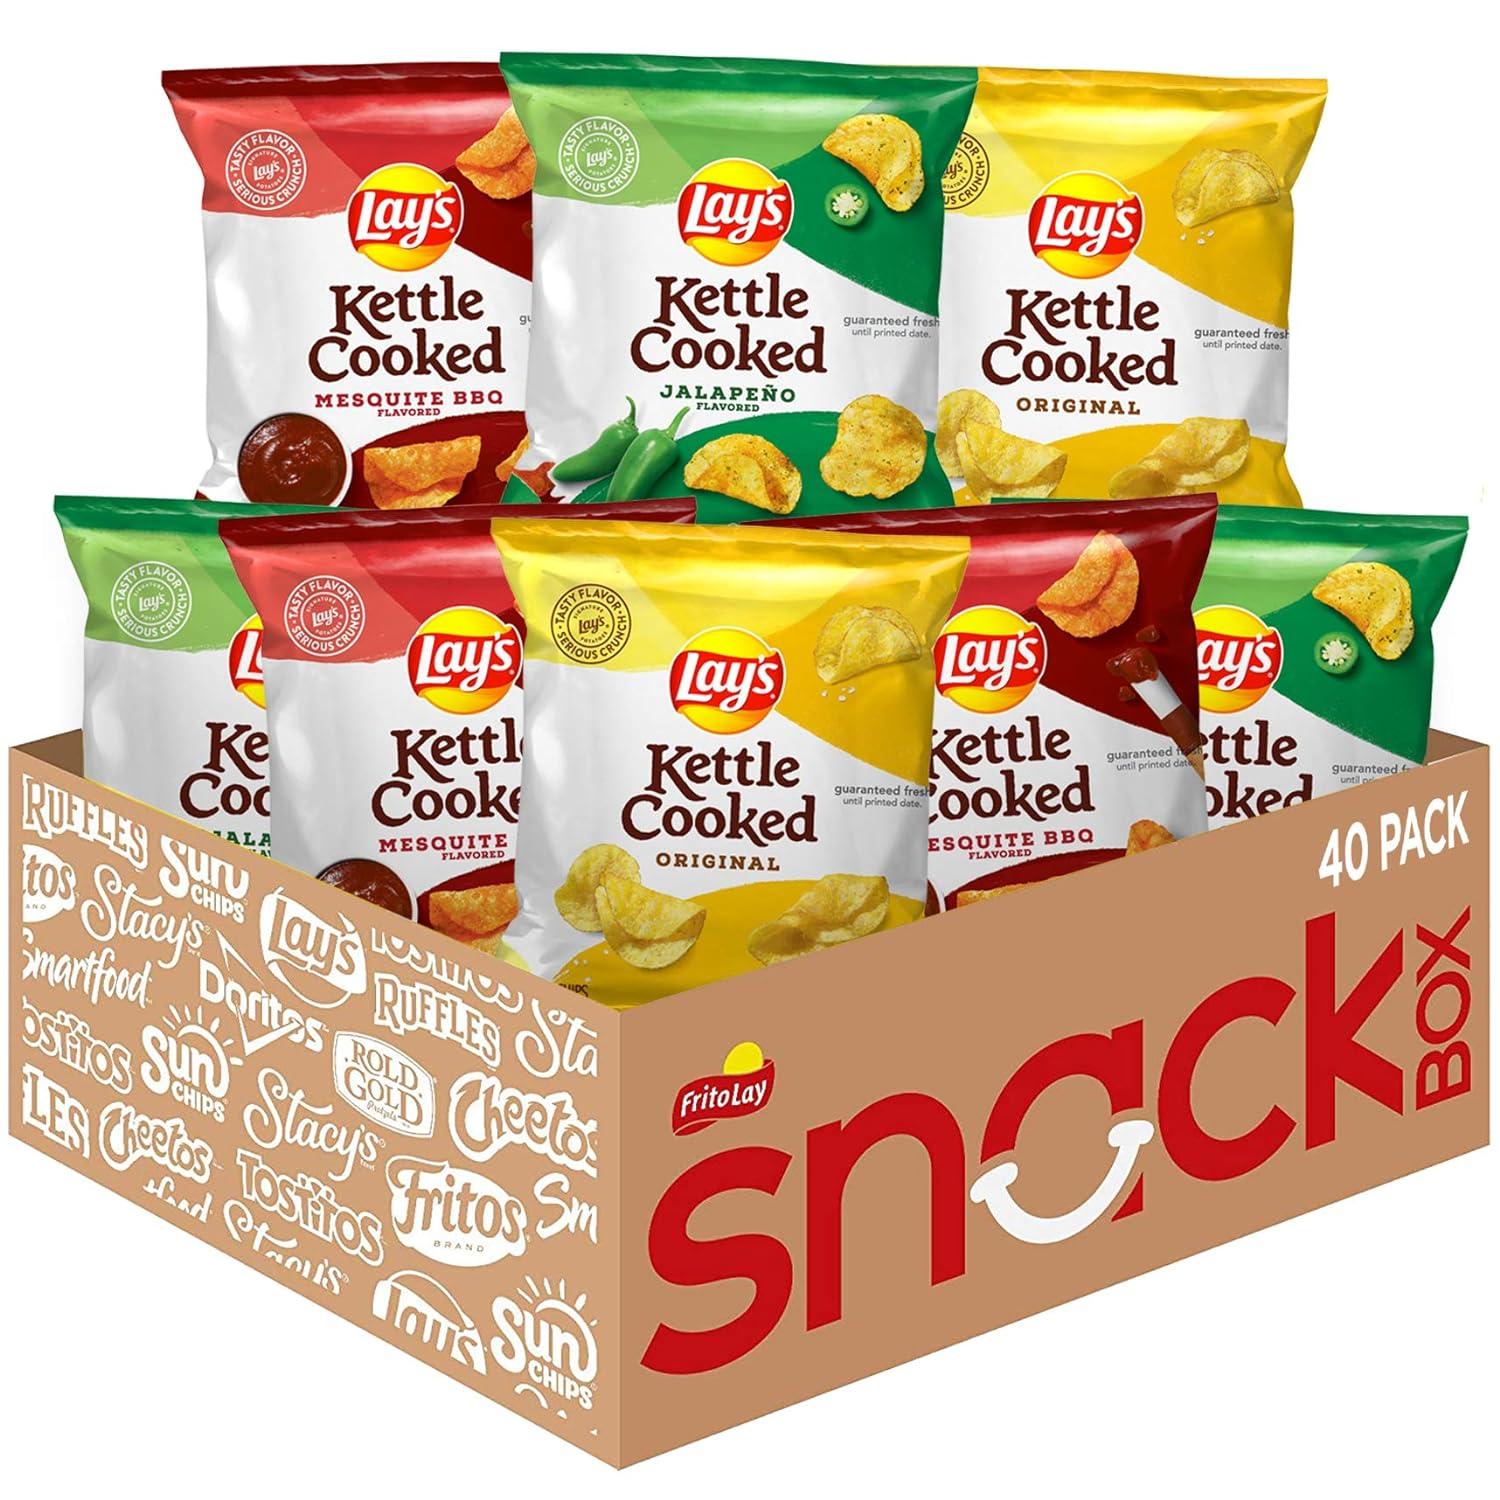 Lays Kettle Cooked Potato Chips 40-Pack for $12.99